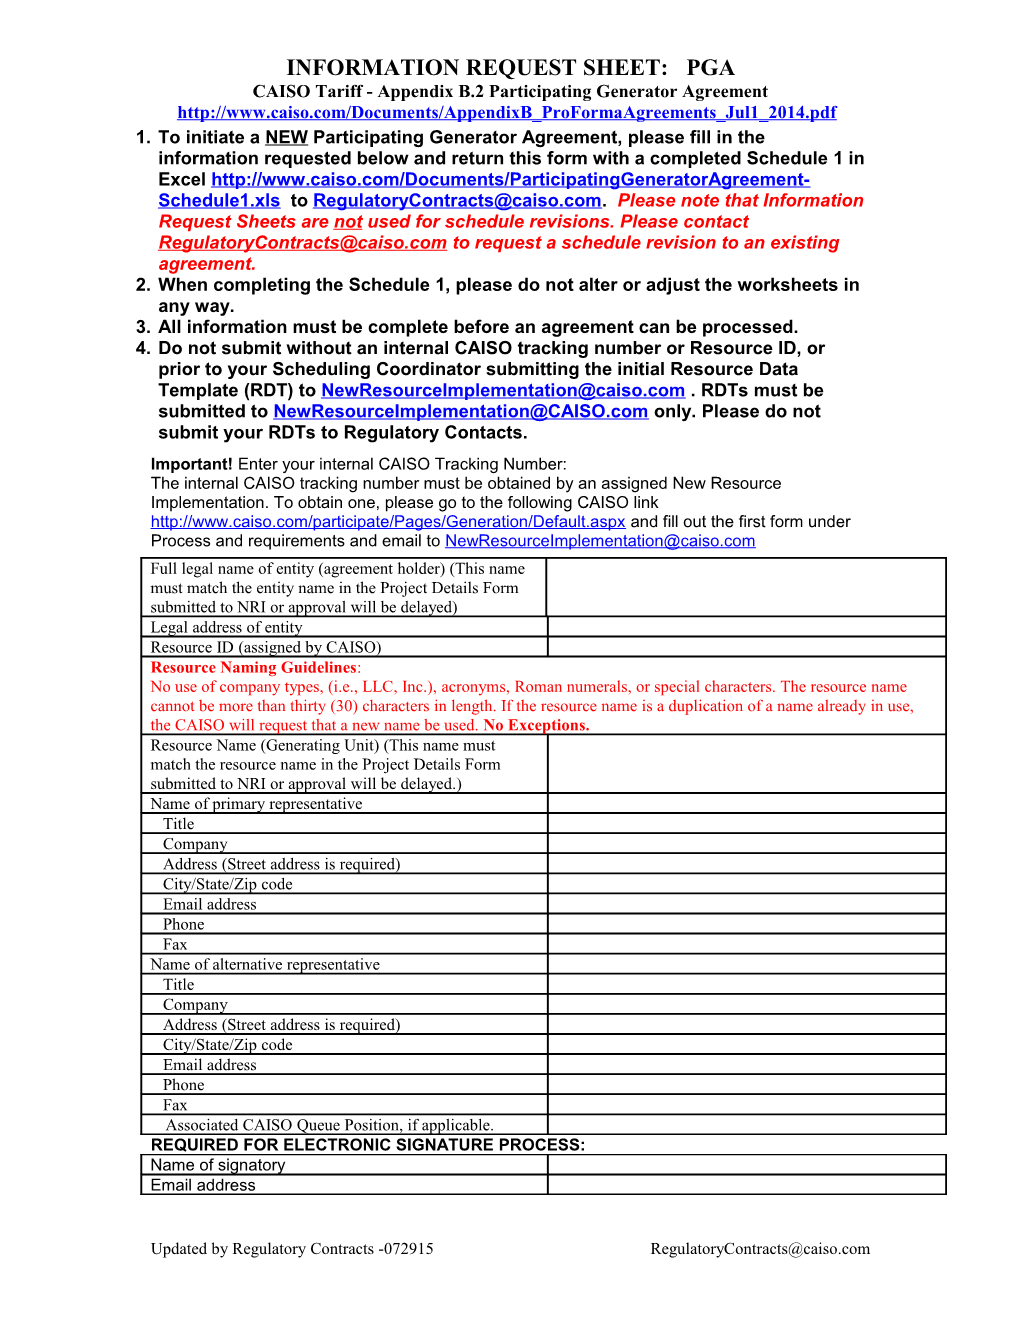 Participating Generator Agreement Information Request Sheet